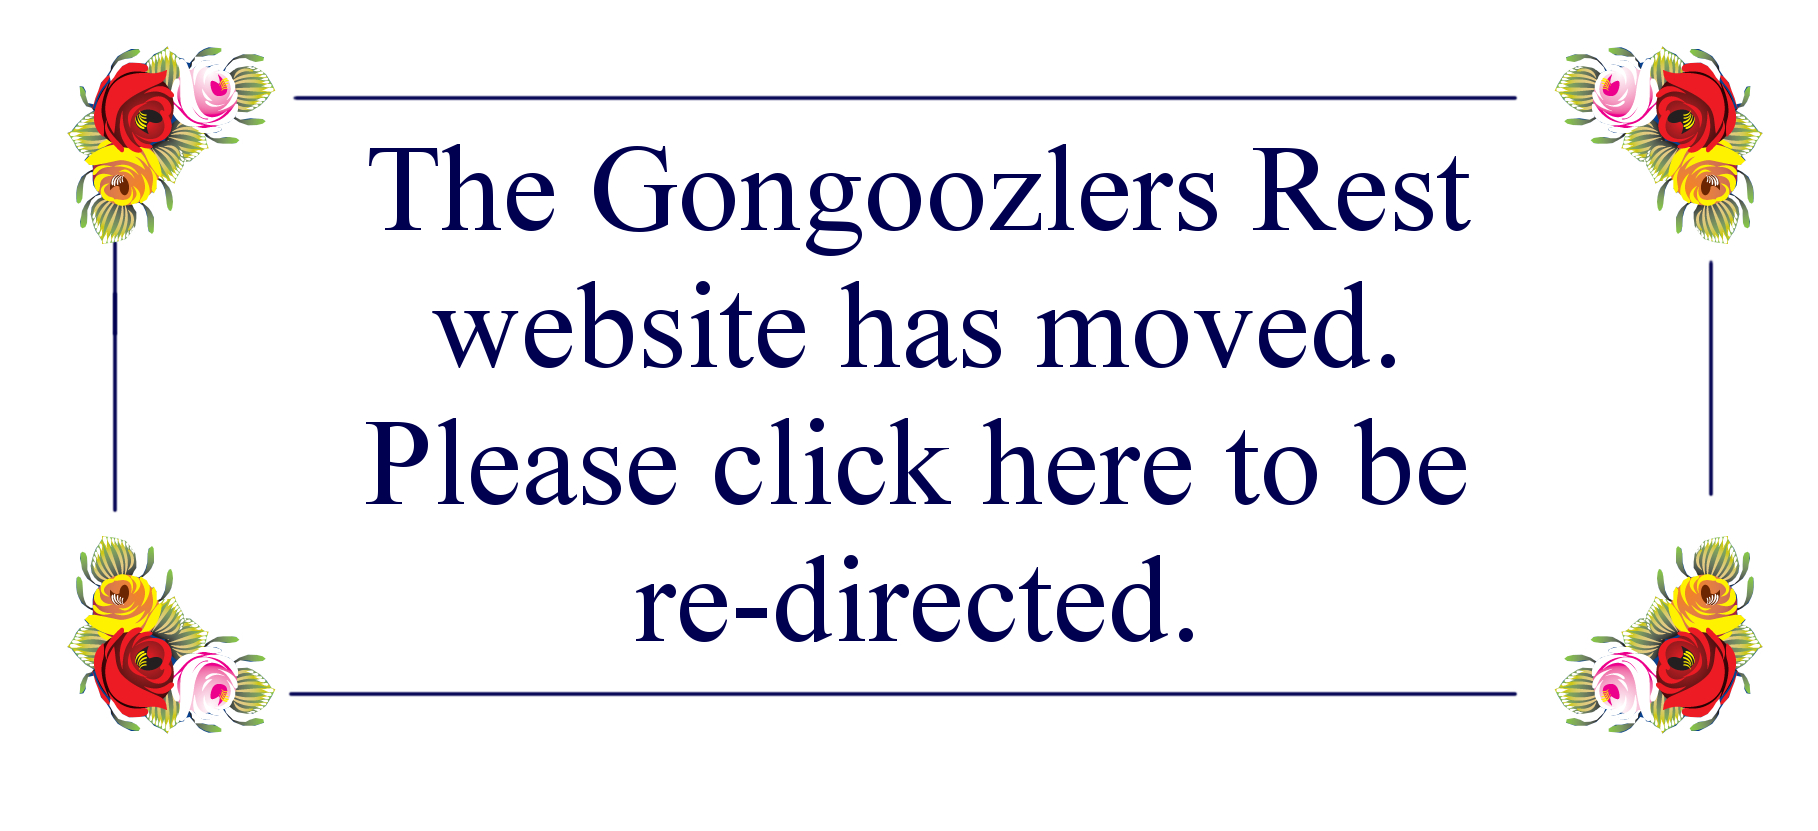 The Gongoozlers Rest website has moved. Please click here to be re-directed